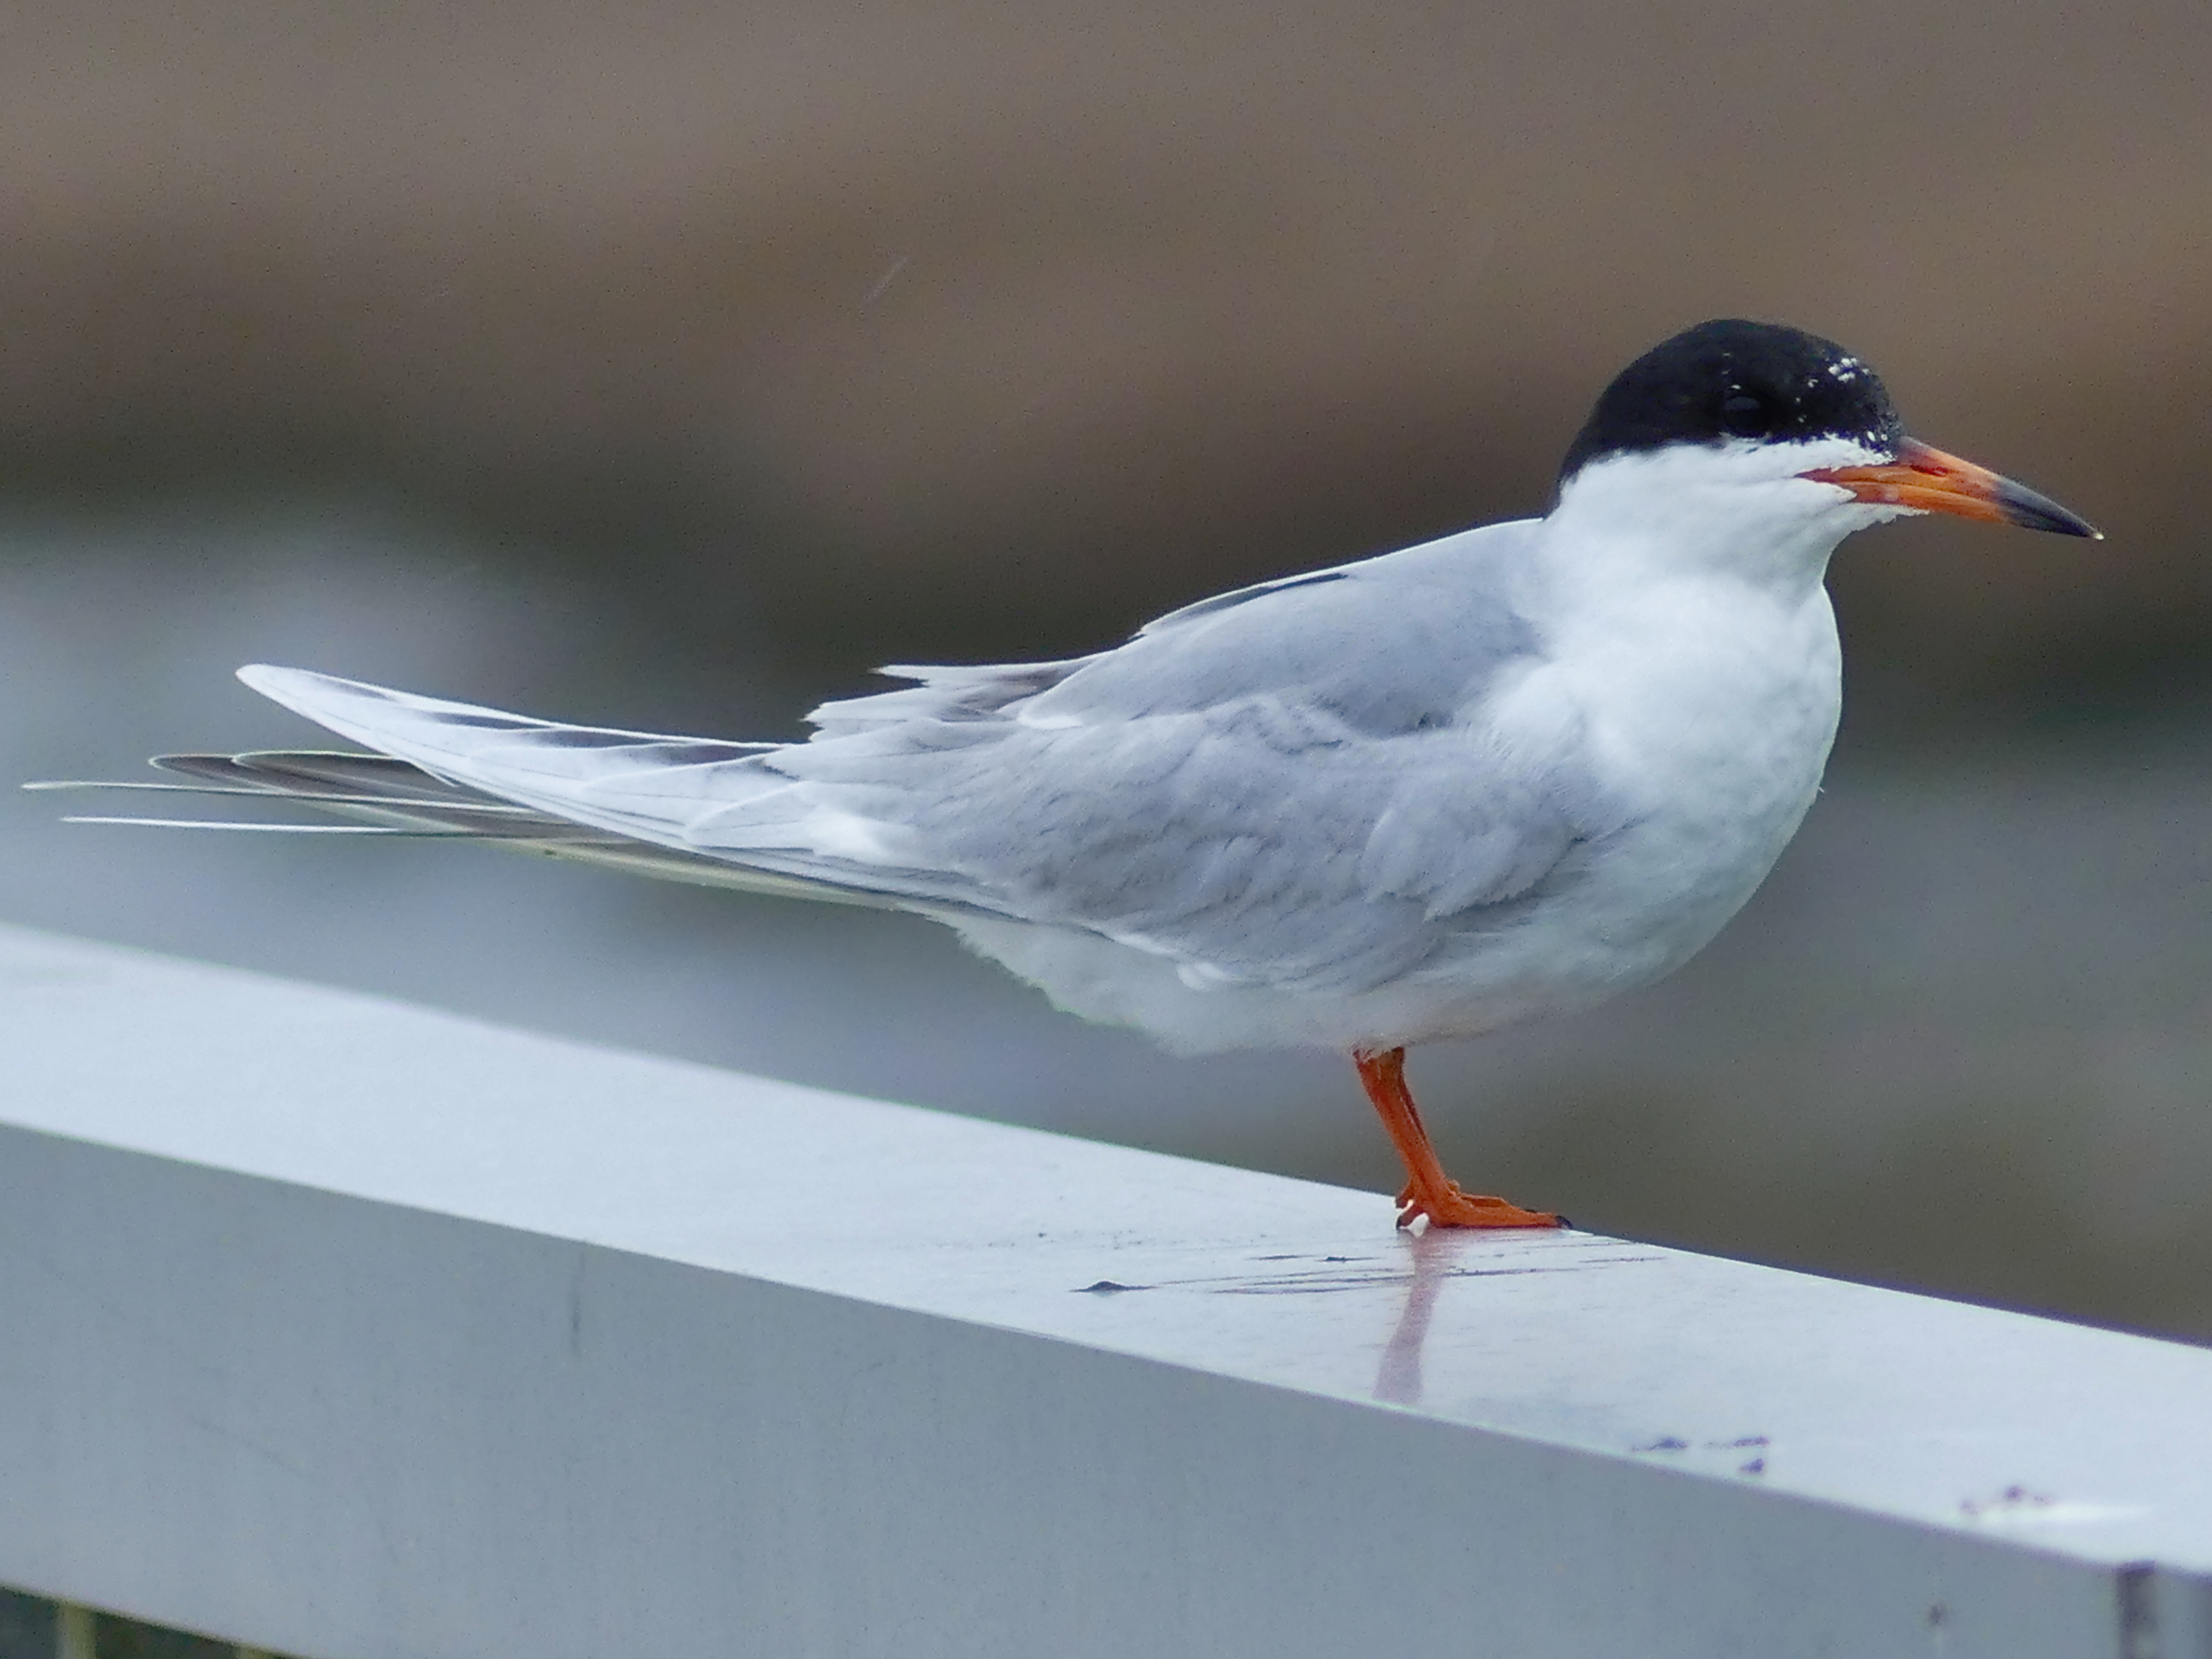 A small tern perched on a bridge guardrail while scanning the water below for food.